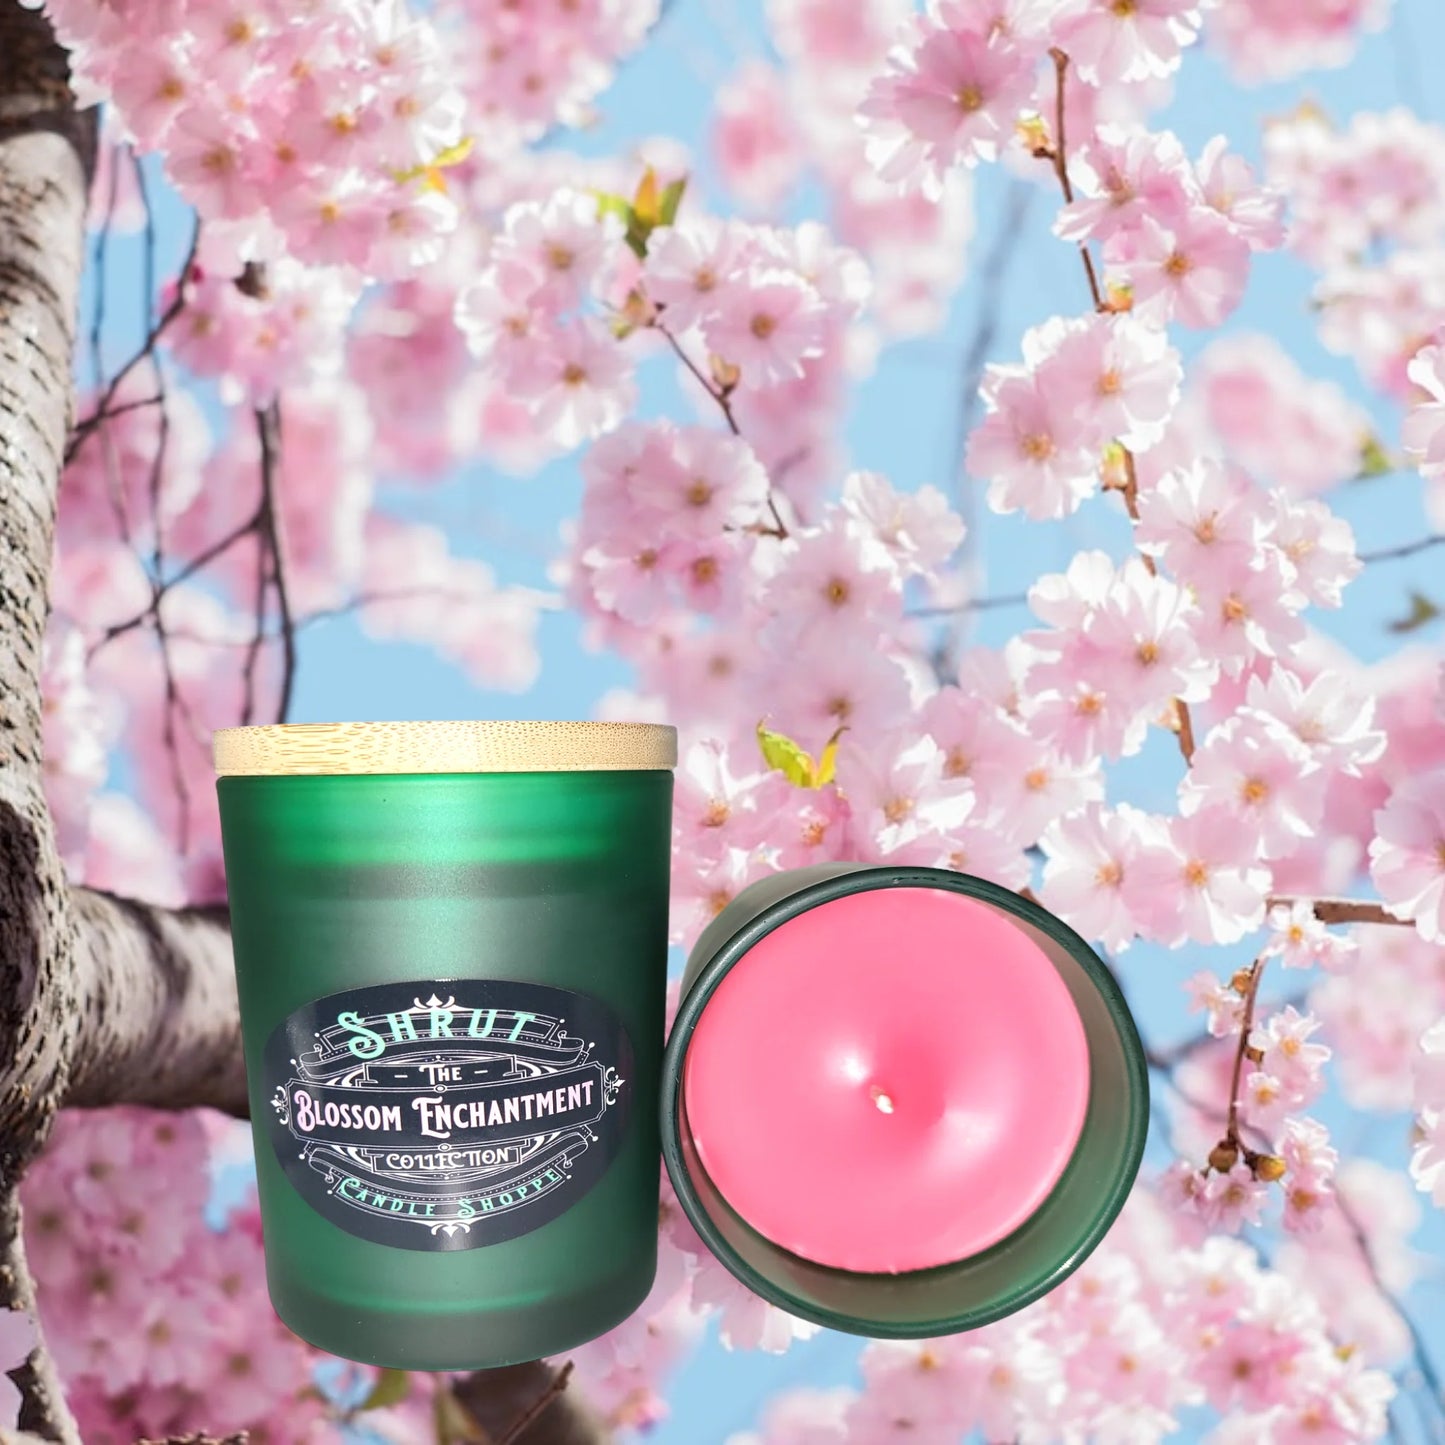 Blossom Enchantment: Love Potion in a Candle